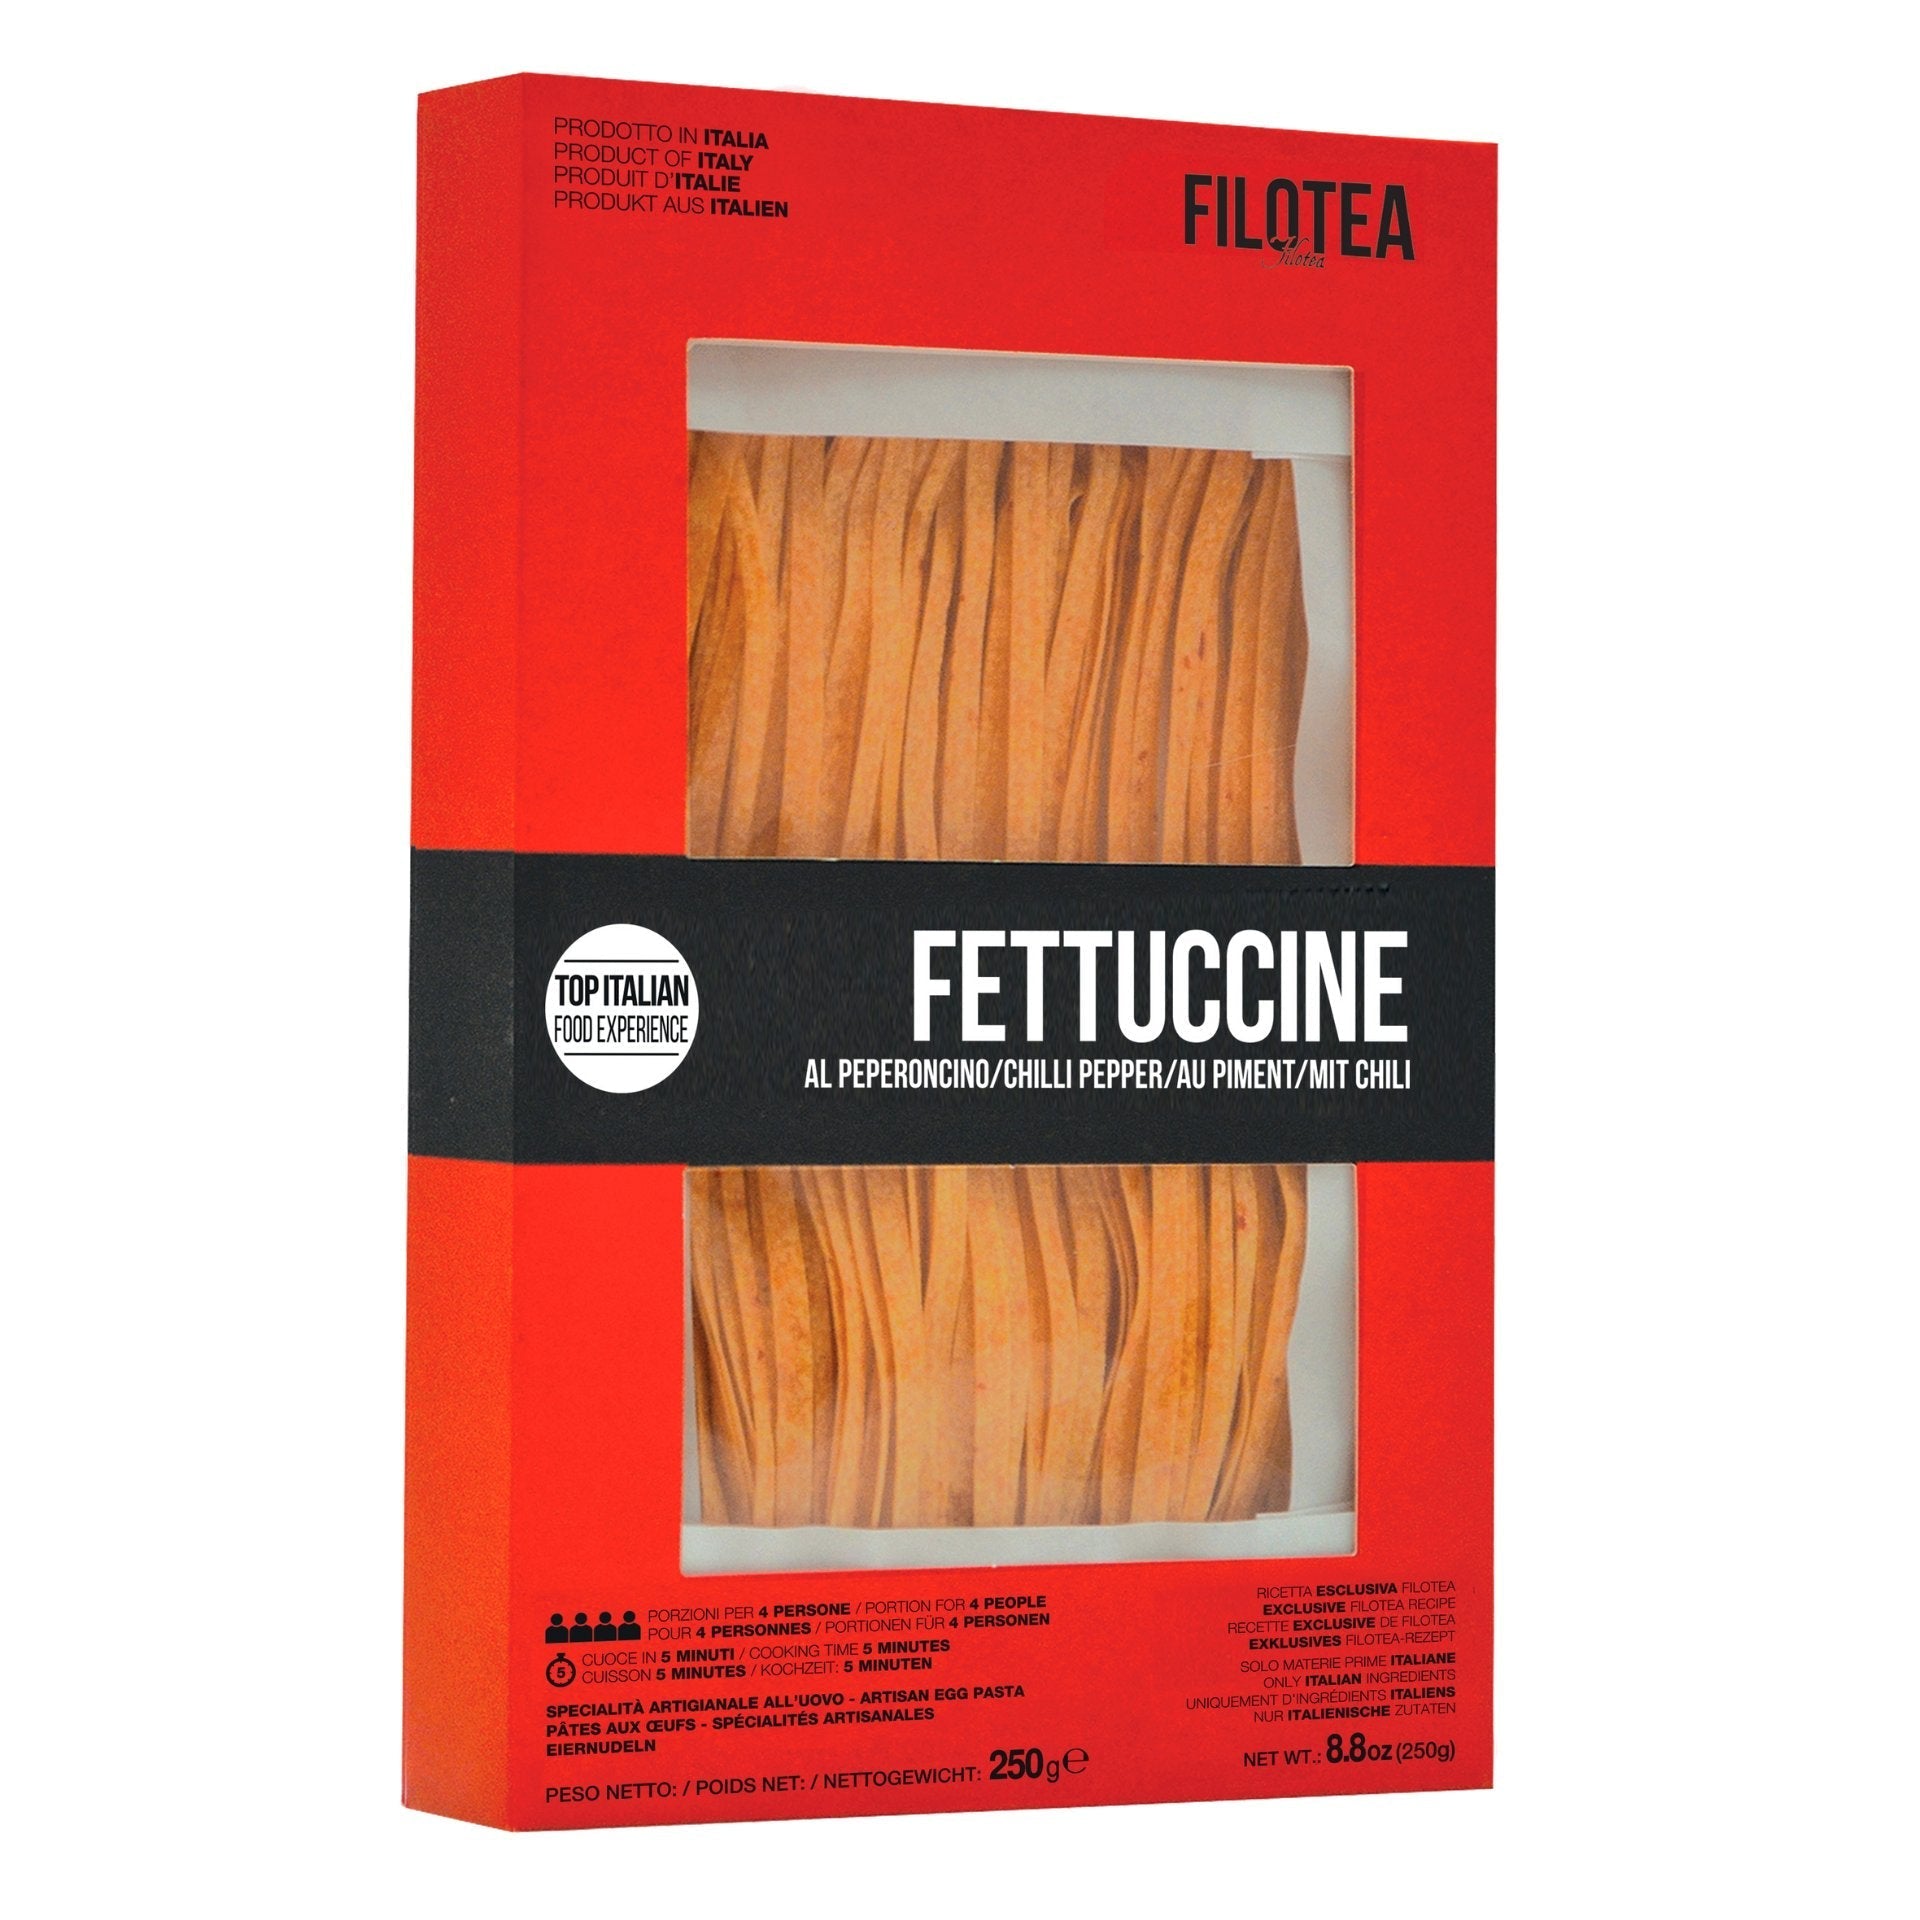 Filotea Chilli Pepper Fettuccine Artisan Egg Pasta 250g  | Imported and distributed in the UK by Just Gourmet Foods